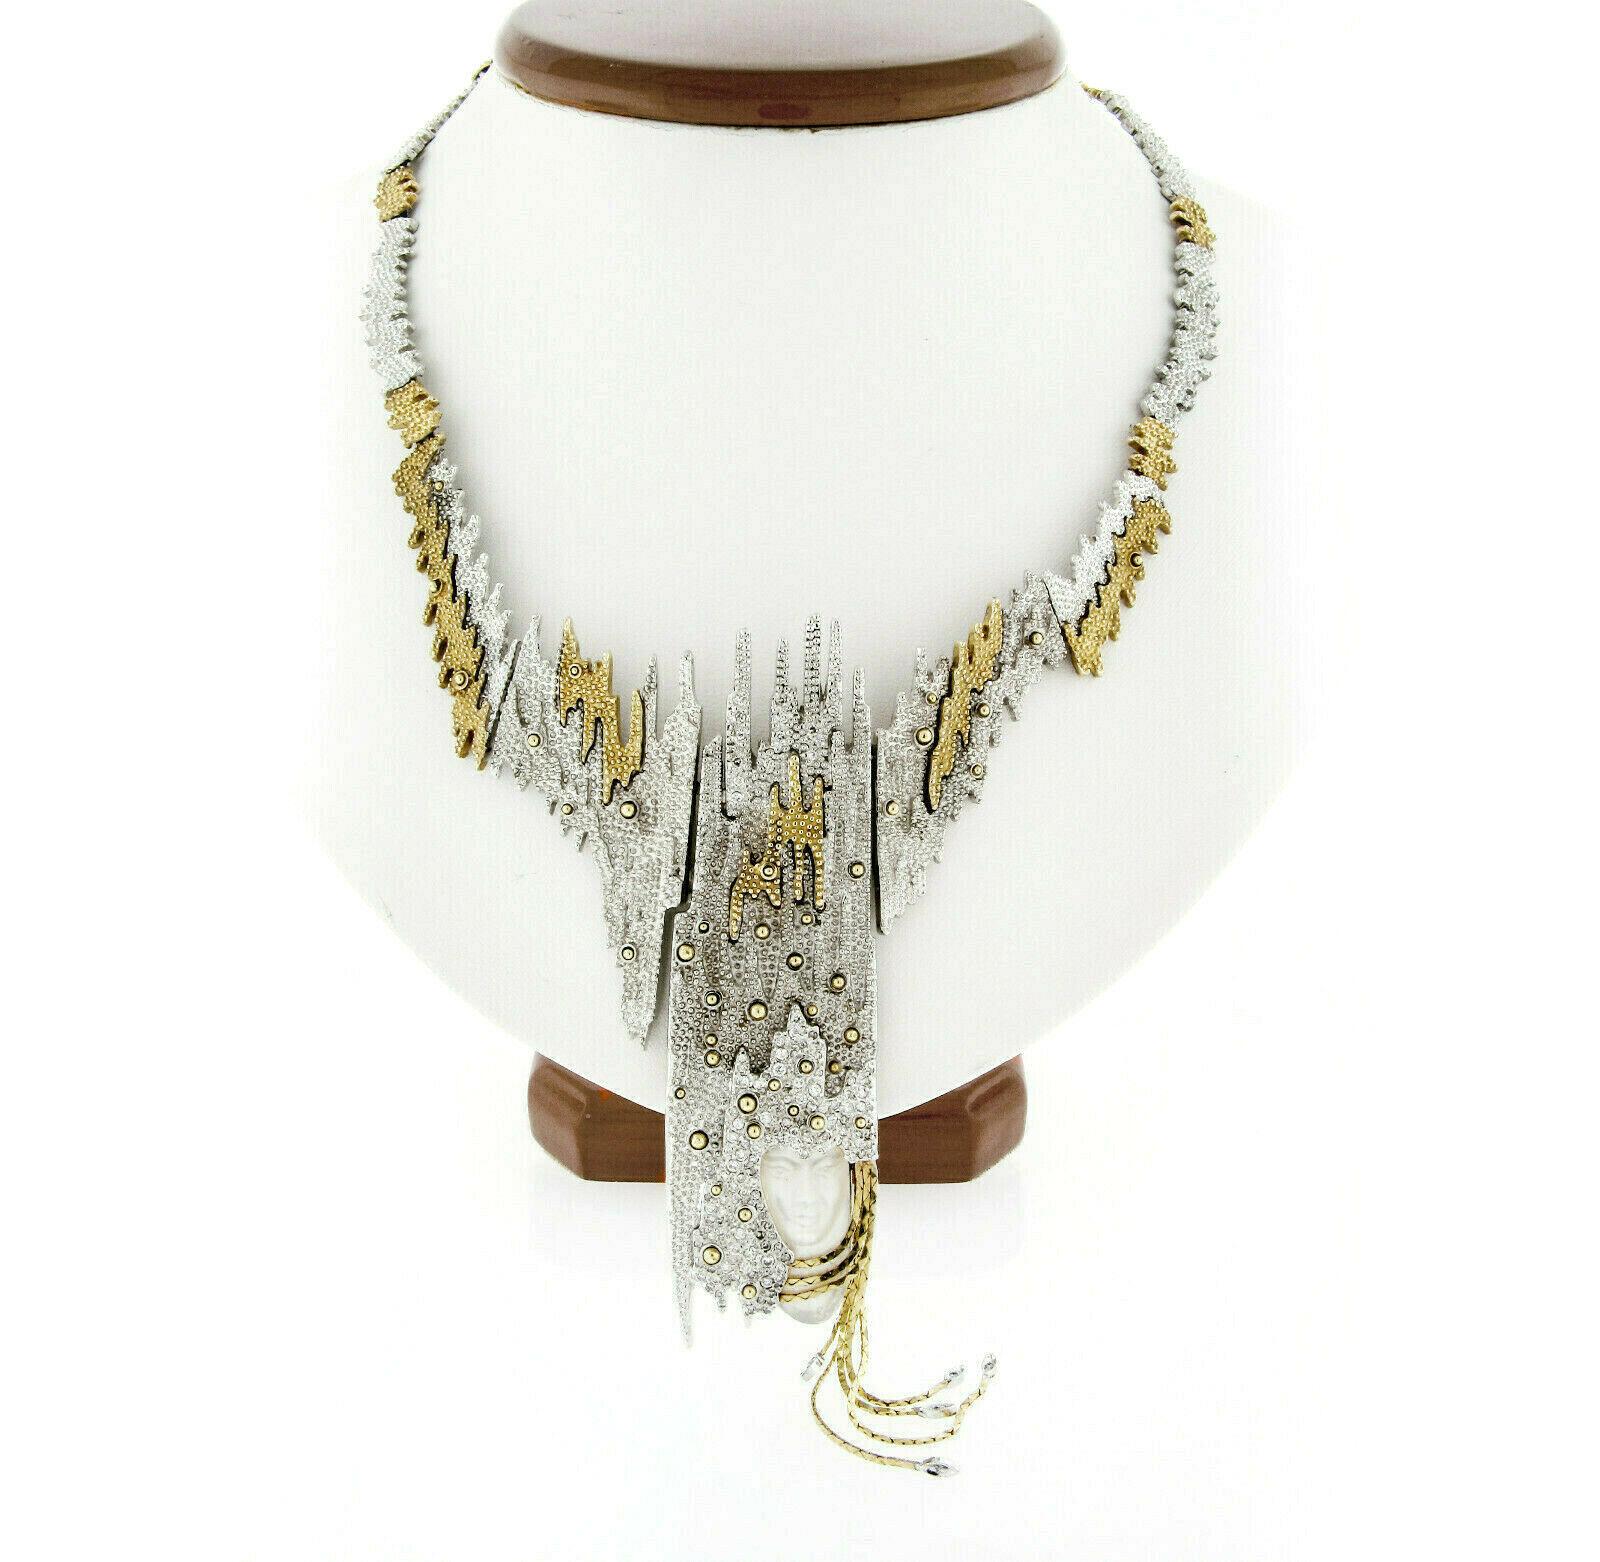 This limited edition necklace and brooch statement piece is designed by Russian-born French artist Erte, Romain de Tirtoff. It is crafted in solid sterling silver and solid 14k yellow gold, and features uniquely textured links decorated with fine